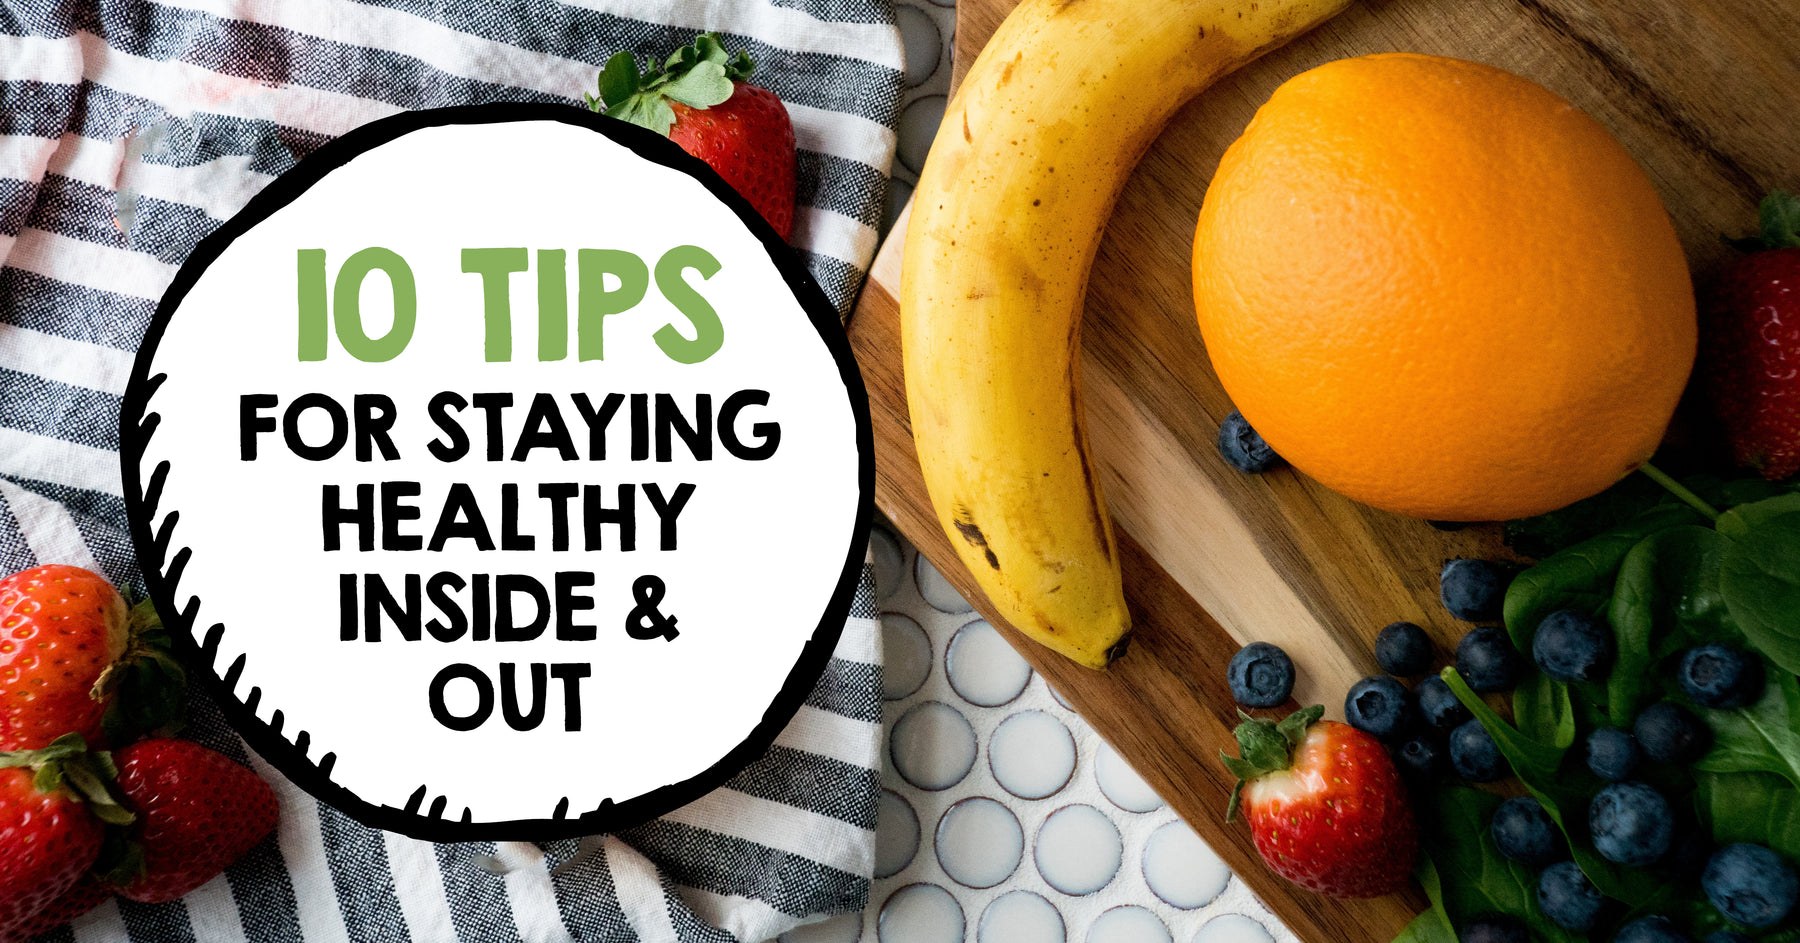 10 Tips for Staying Healthy Inside & Out